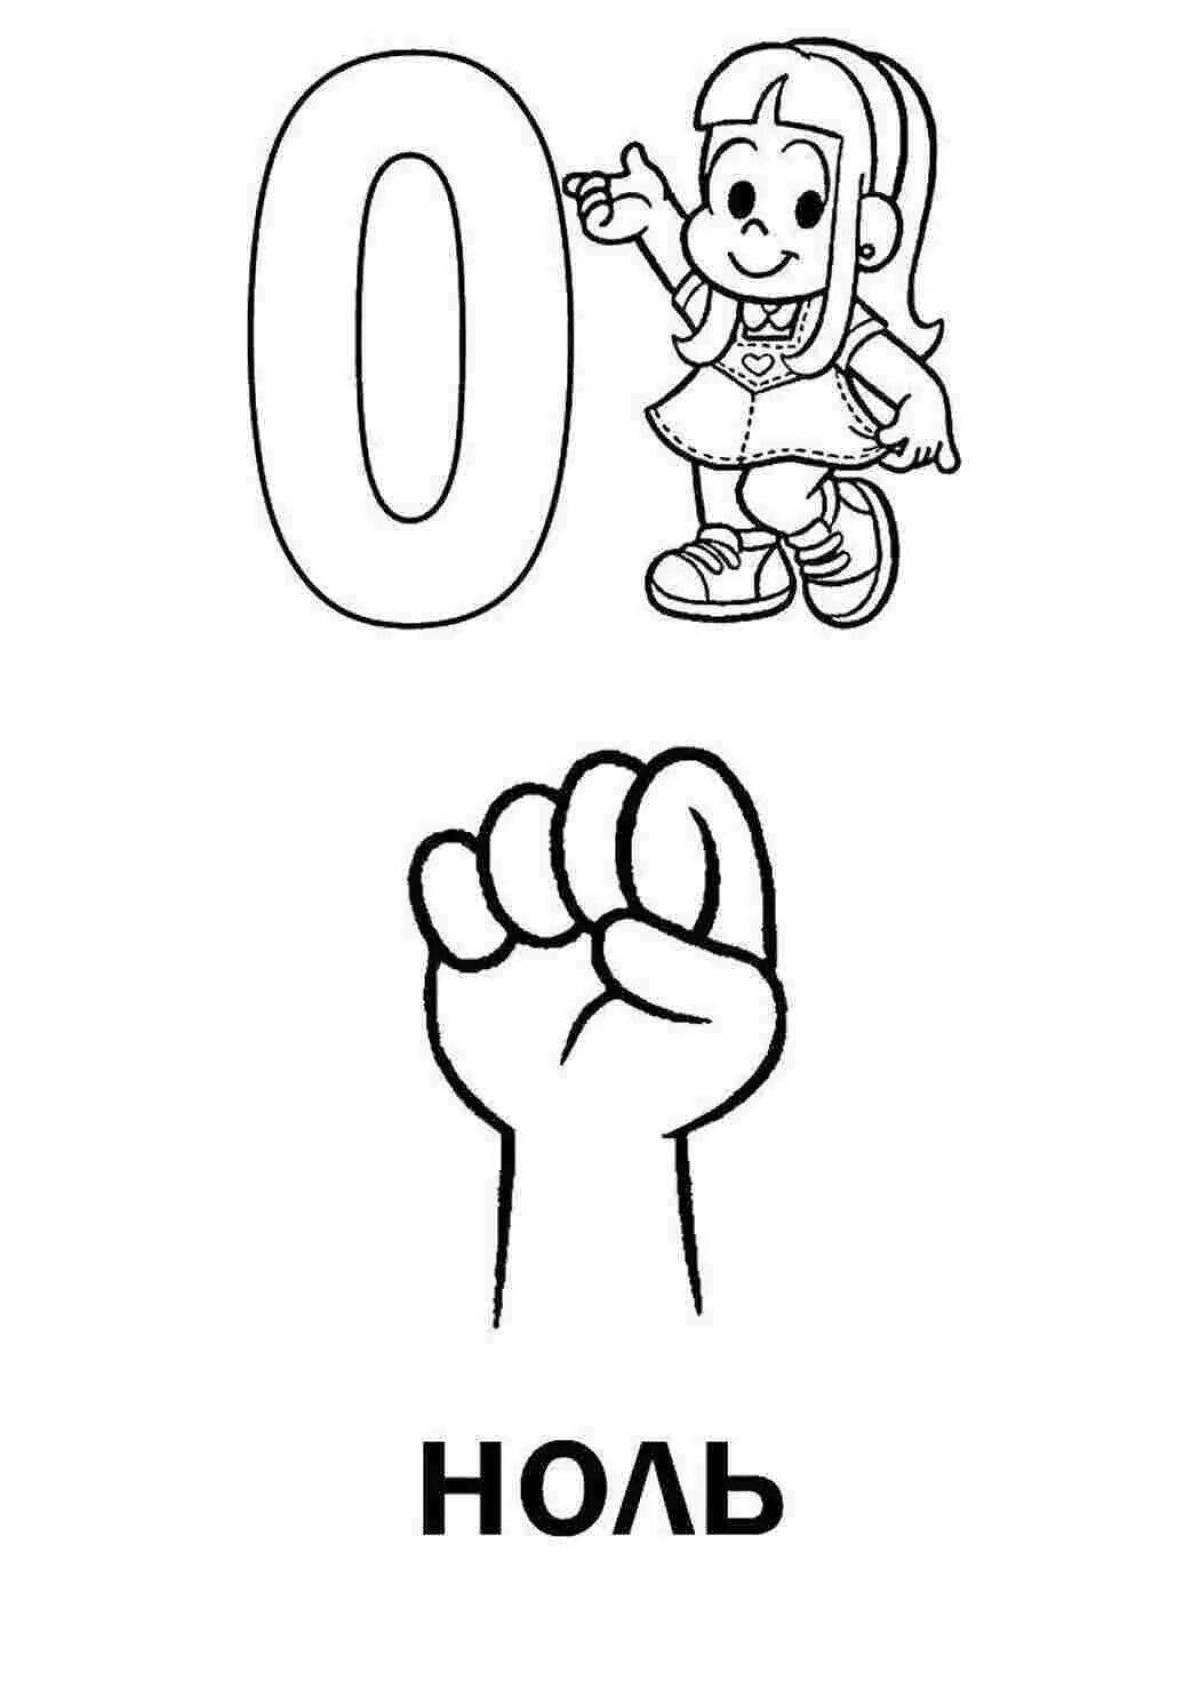 Coloring page charming number zero